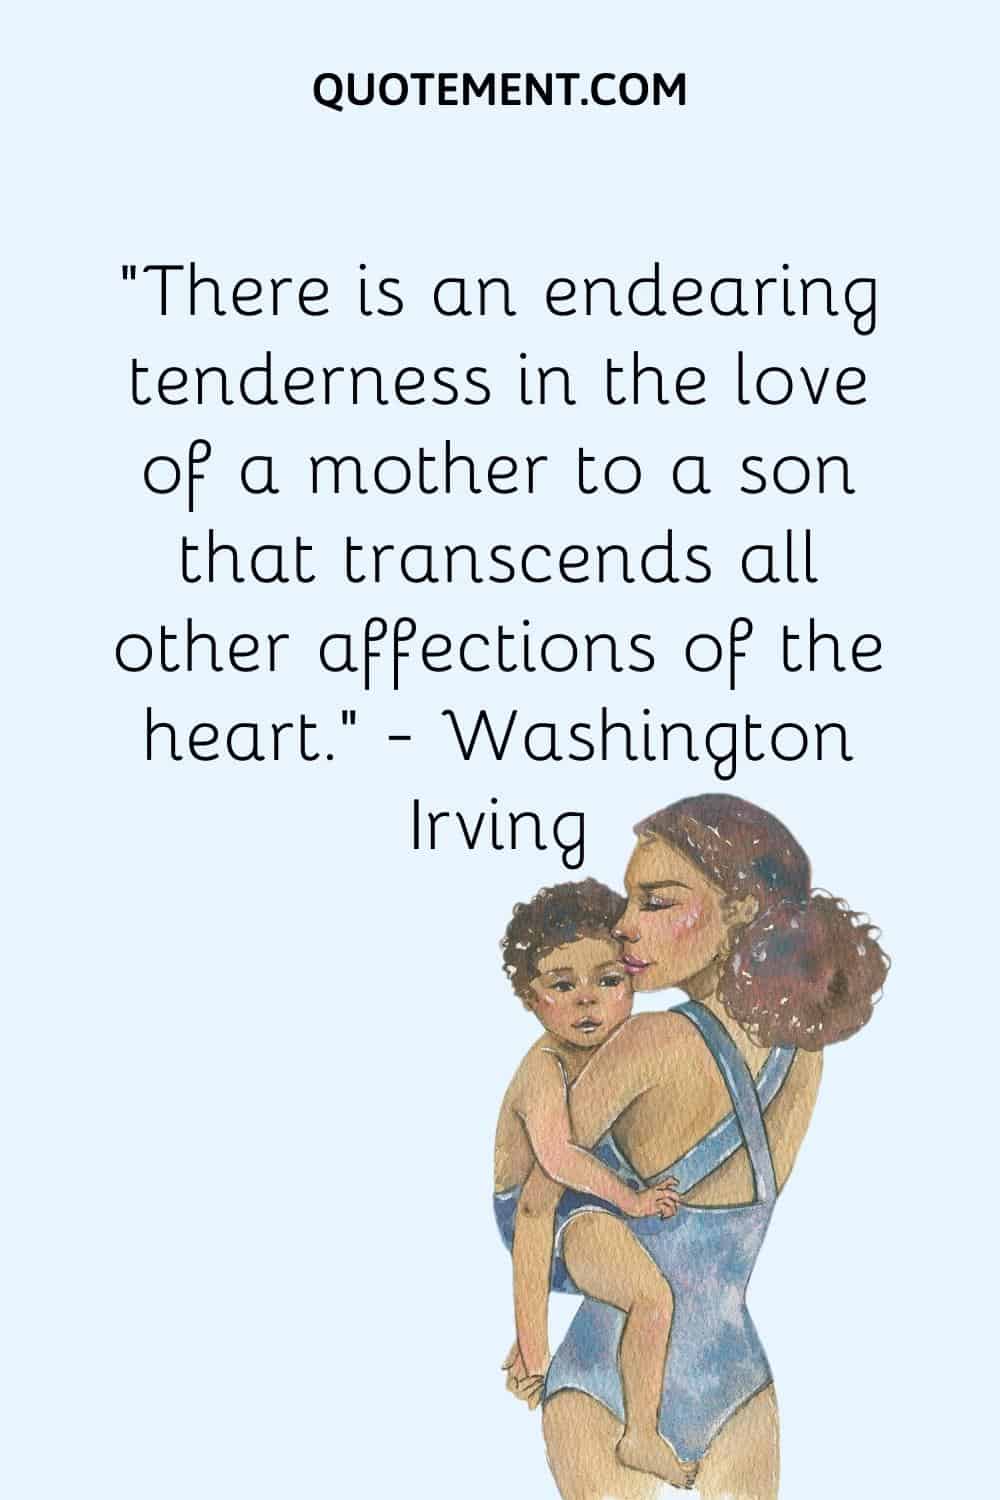 “There is an endearing tenderness in the love of a mother to a son that transcends all other affections of the heart.” — Washington Irving